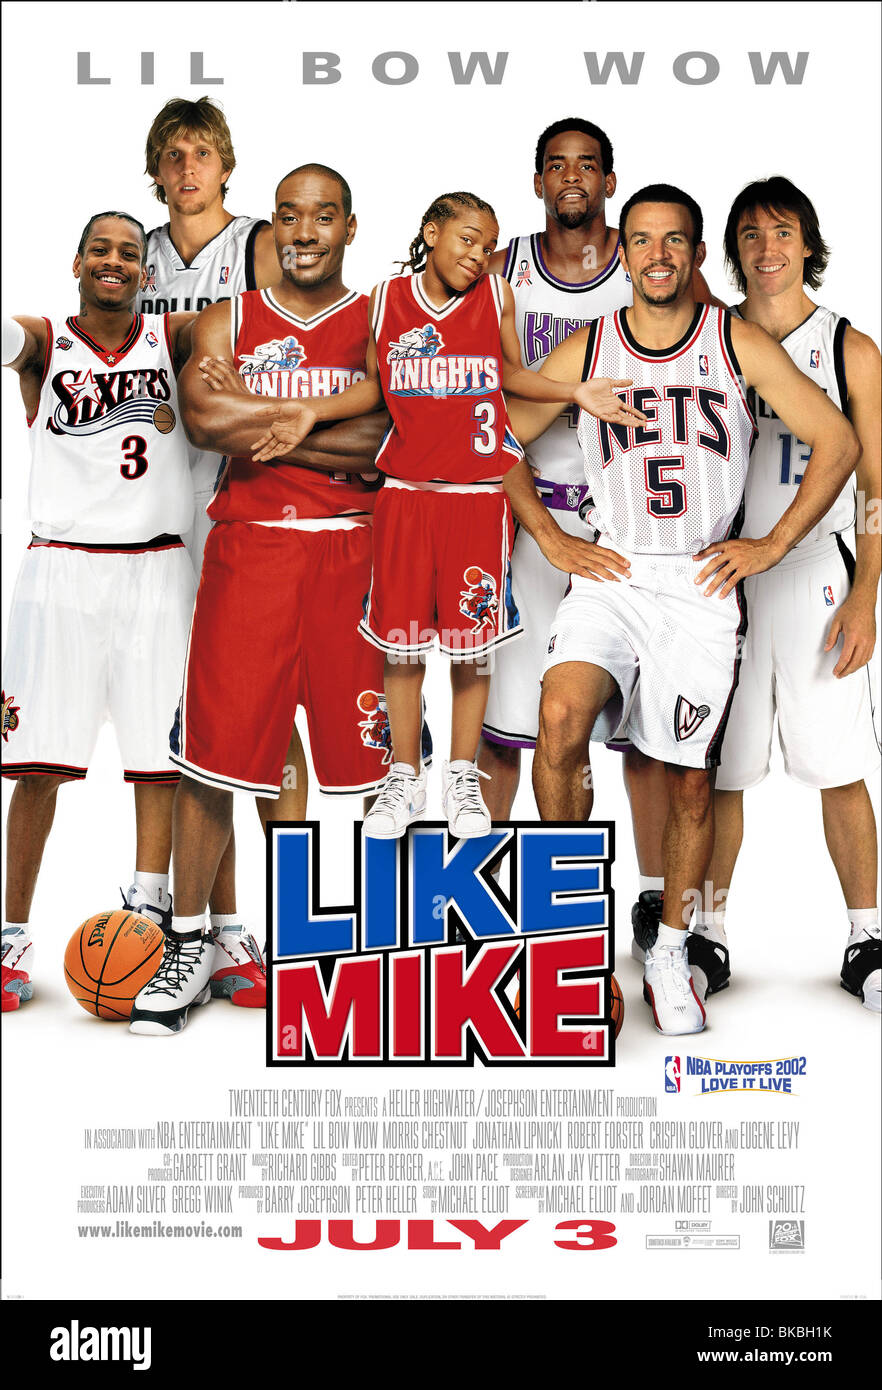 WIE MIKE (2002) LIL BOW WOW POSTER LKMK 001 POST Stockfoto